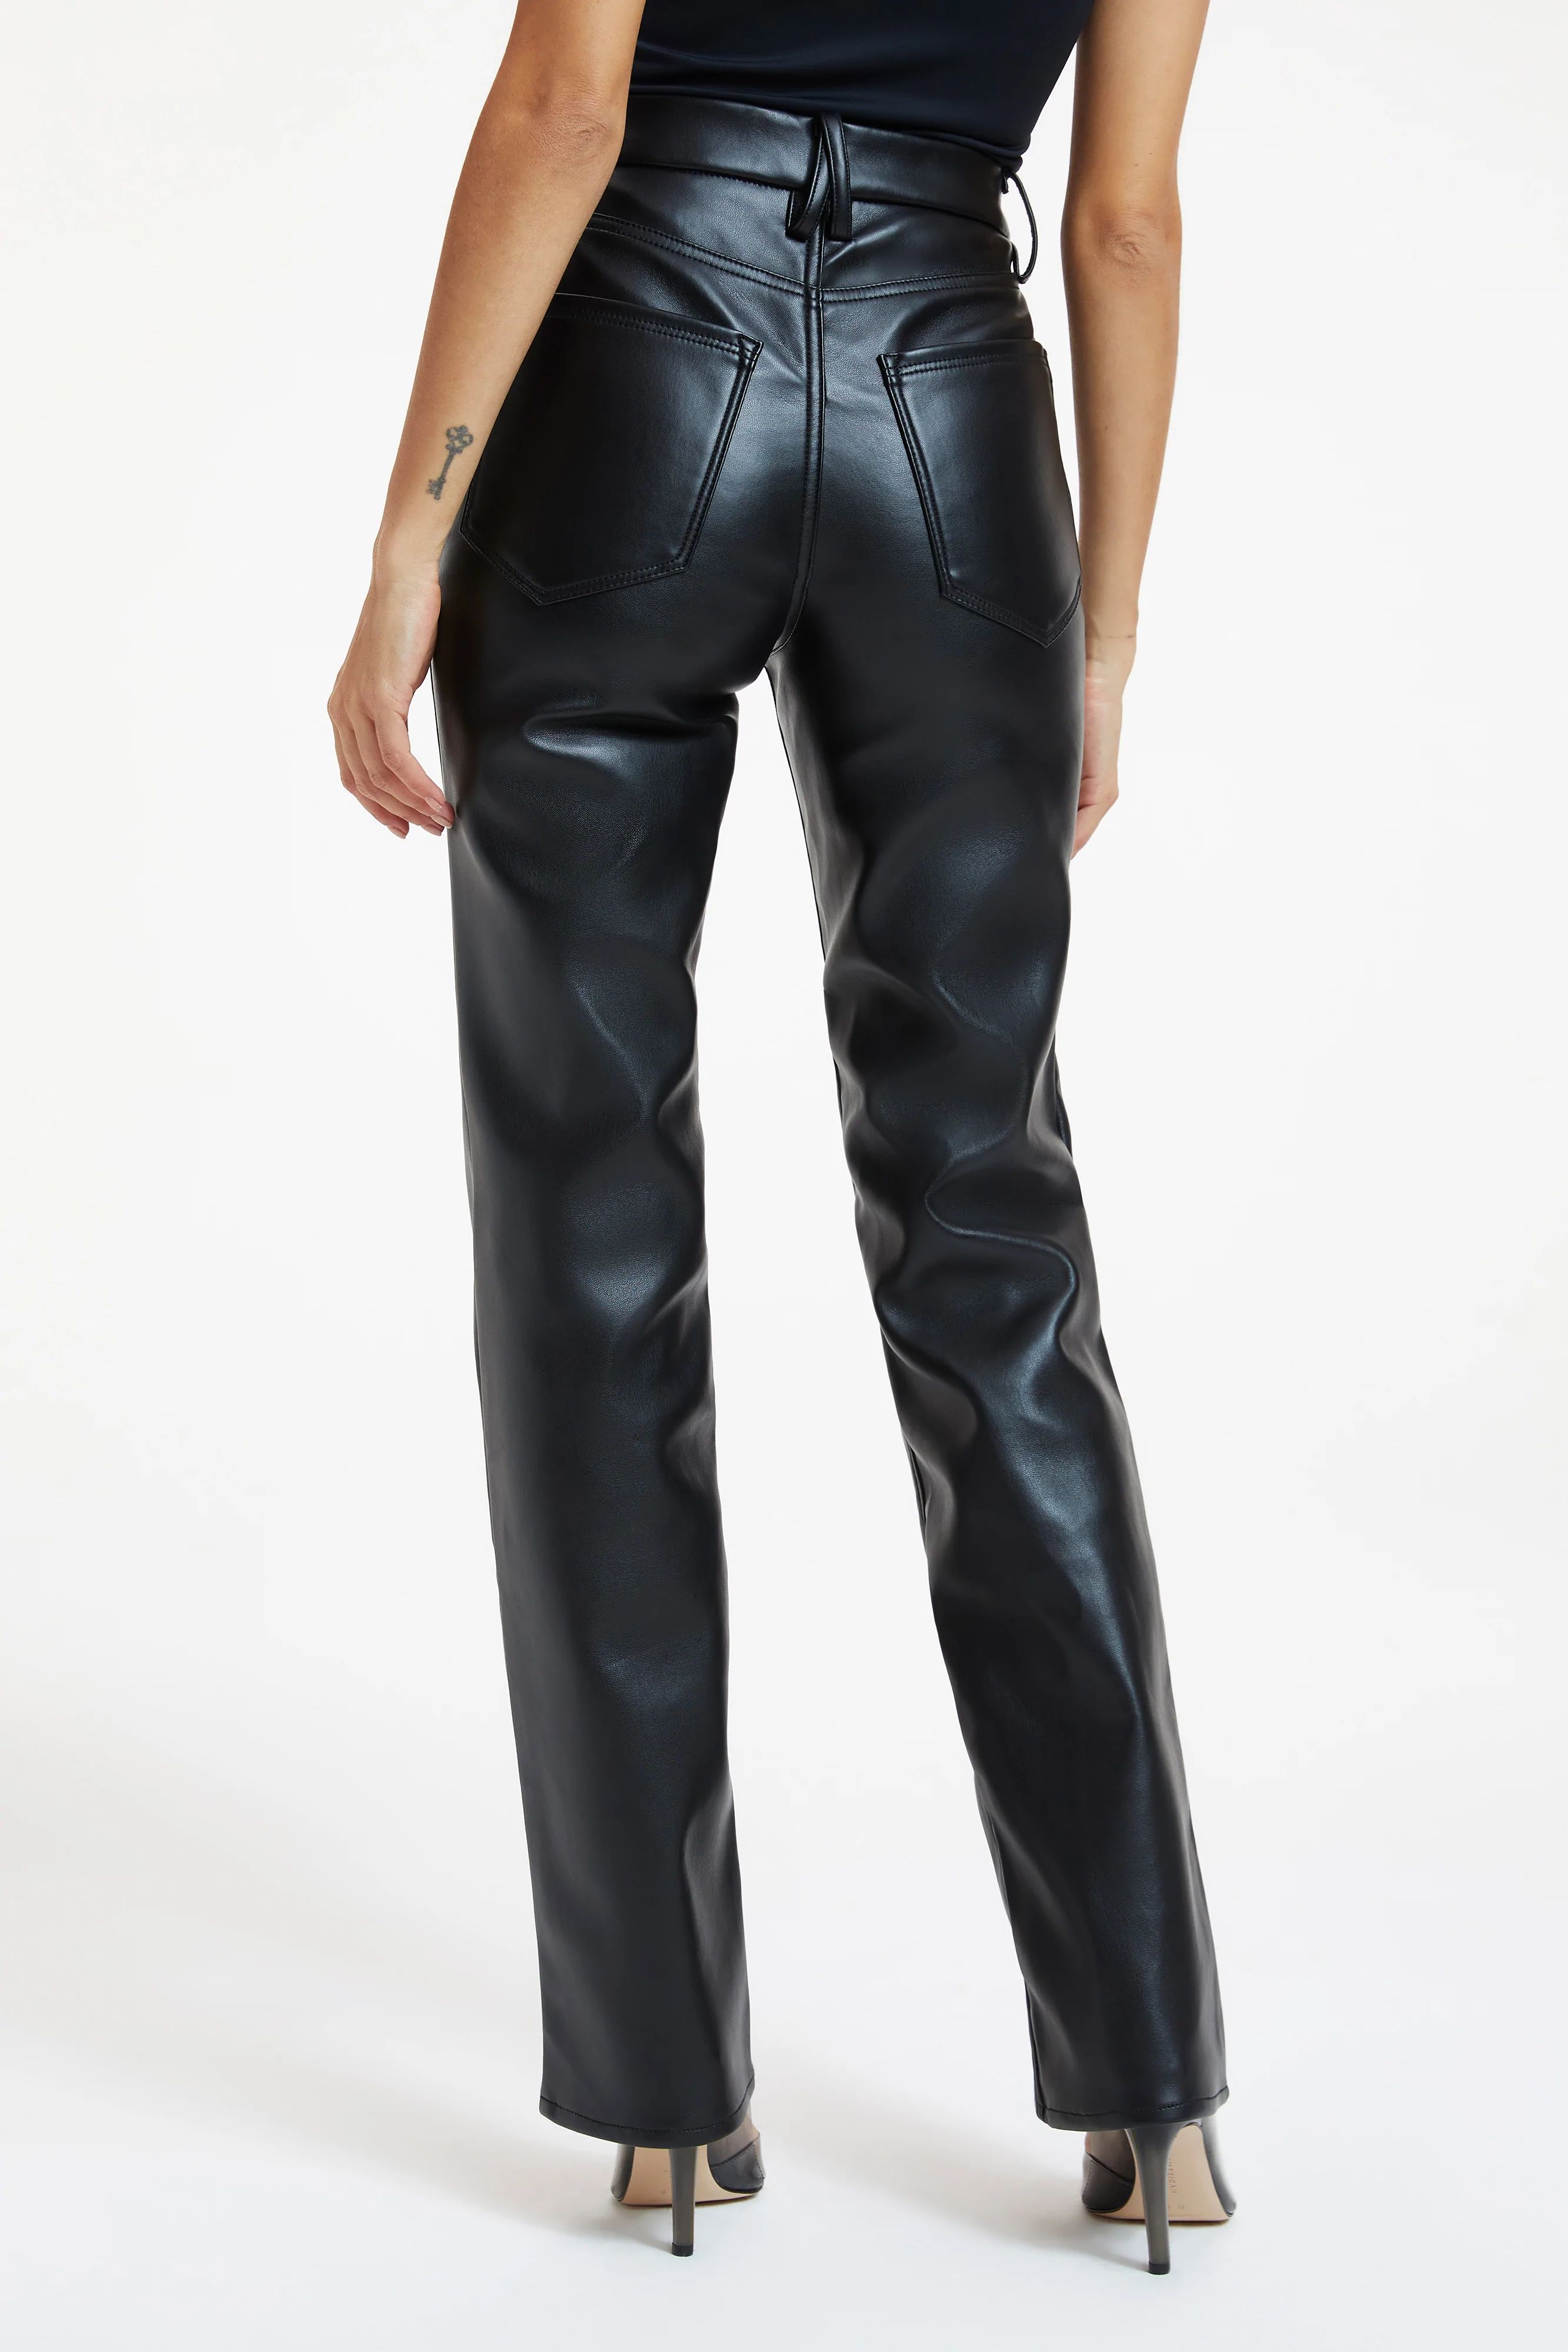 BETTER THAN LEATHER GOOD ICON PANTS | BLACK001 | Good American